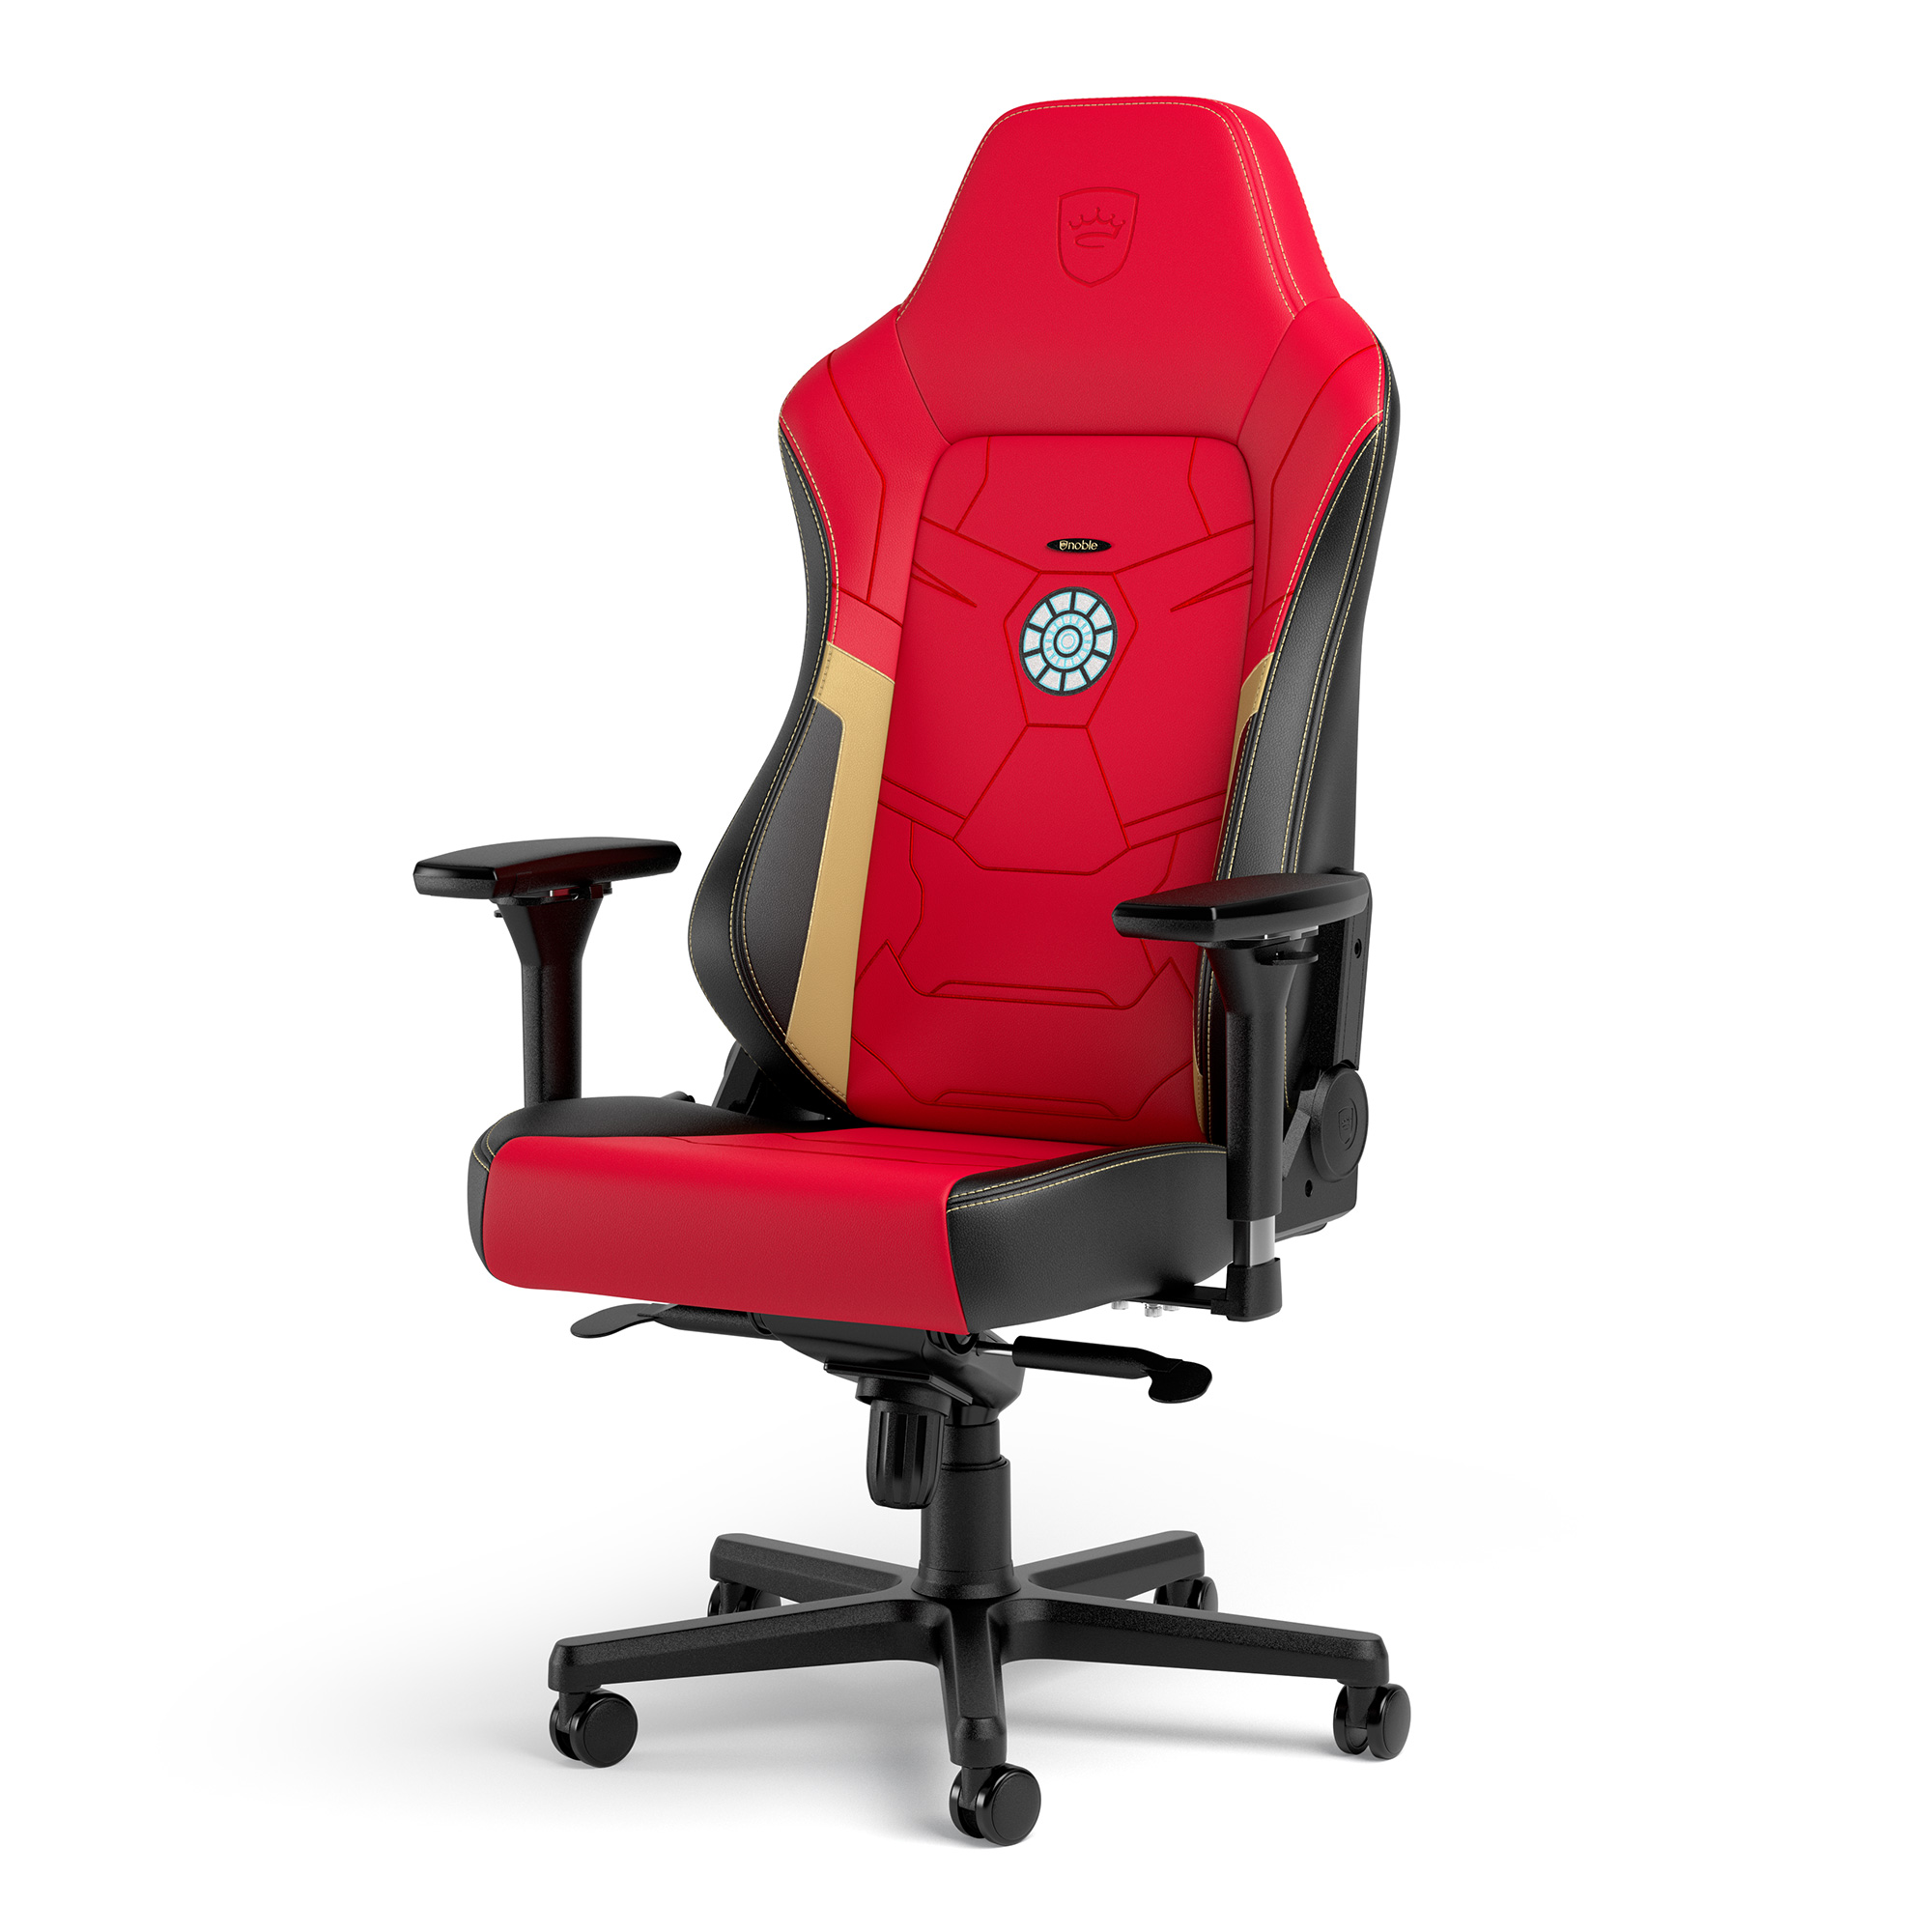 noblechairs - noblechairs HERO Gaming Chair - Iron Man Edition